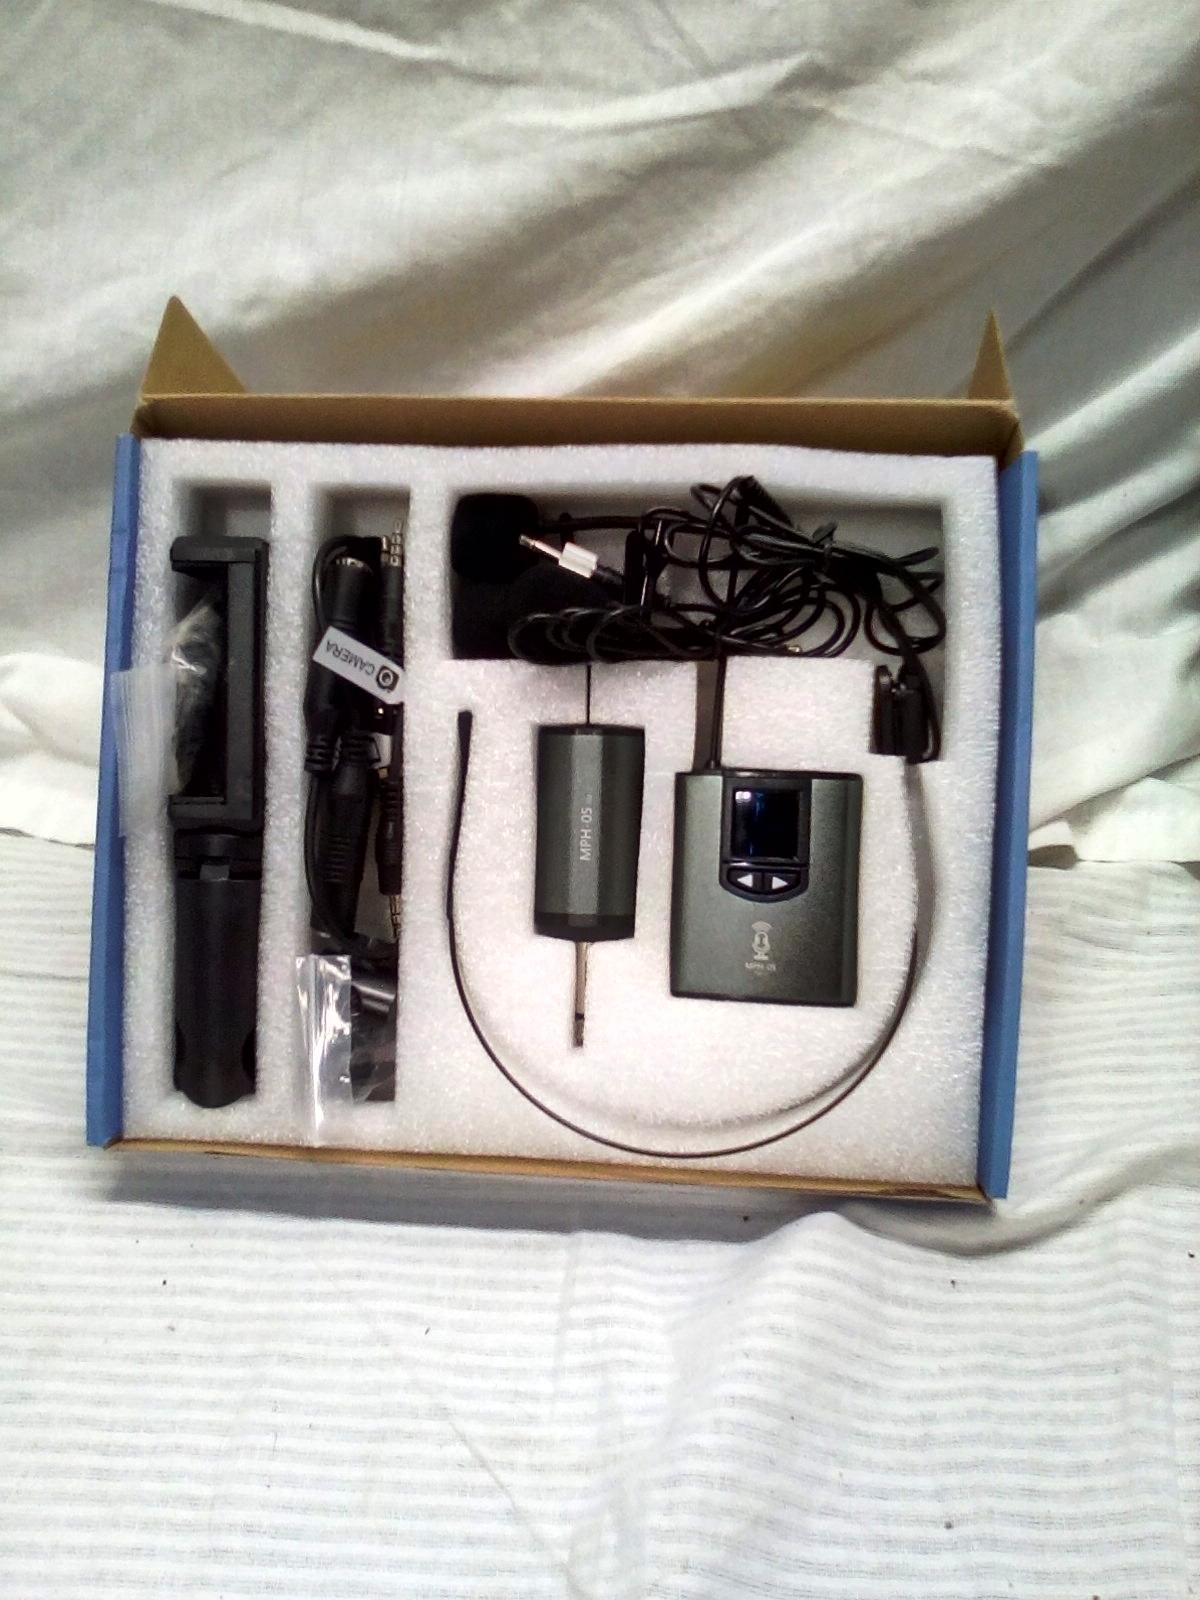 Wireless Headset Lavailer Microphone System